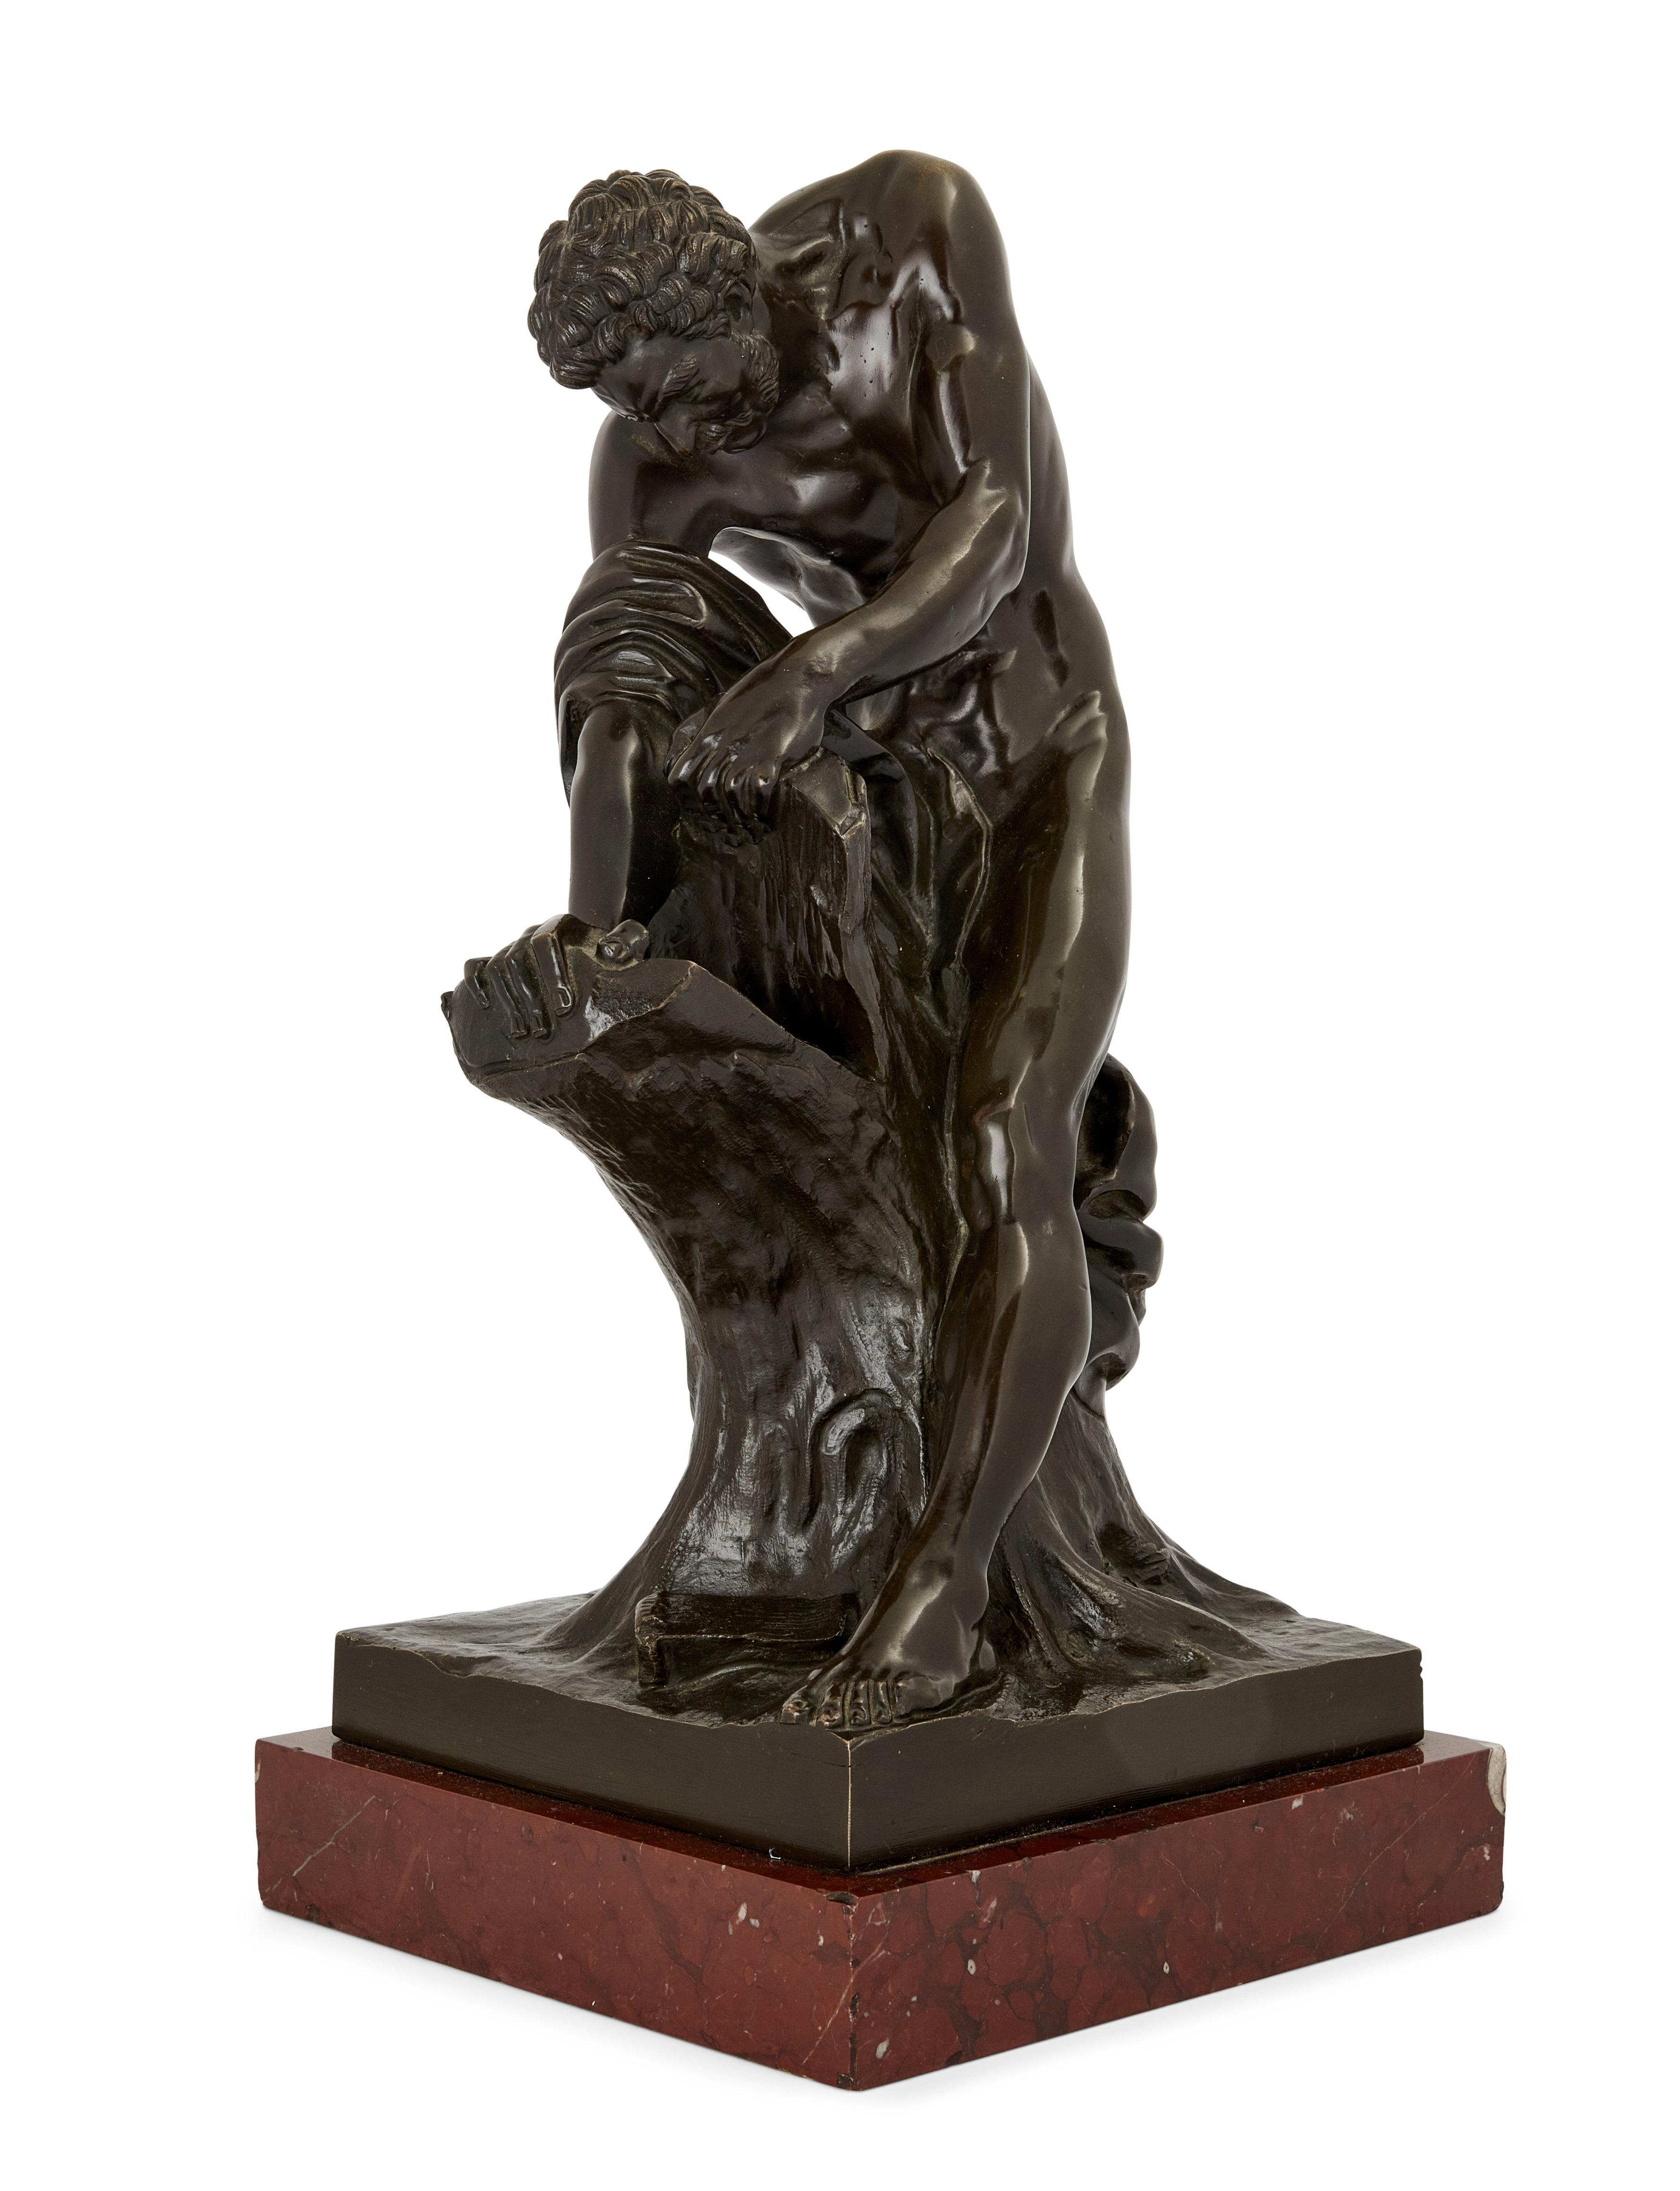 After Edme Dumont, French, 1761-1844, a French bronze model of Milo of Croton, Mid-19th century, ... - Image 2 of 3